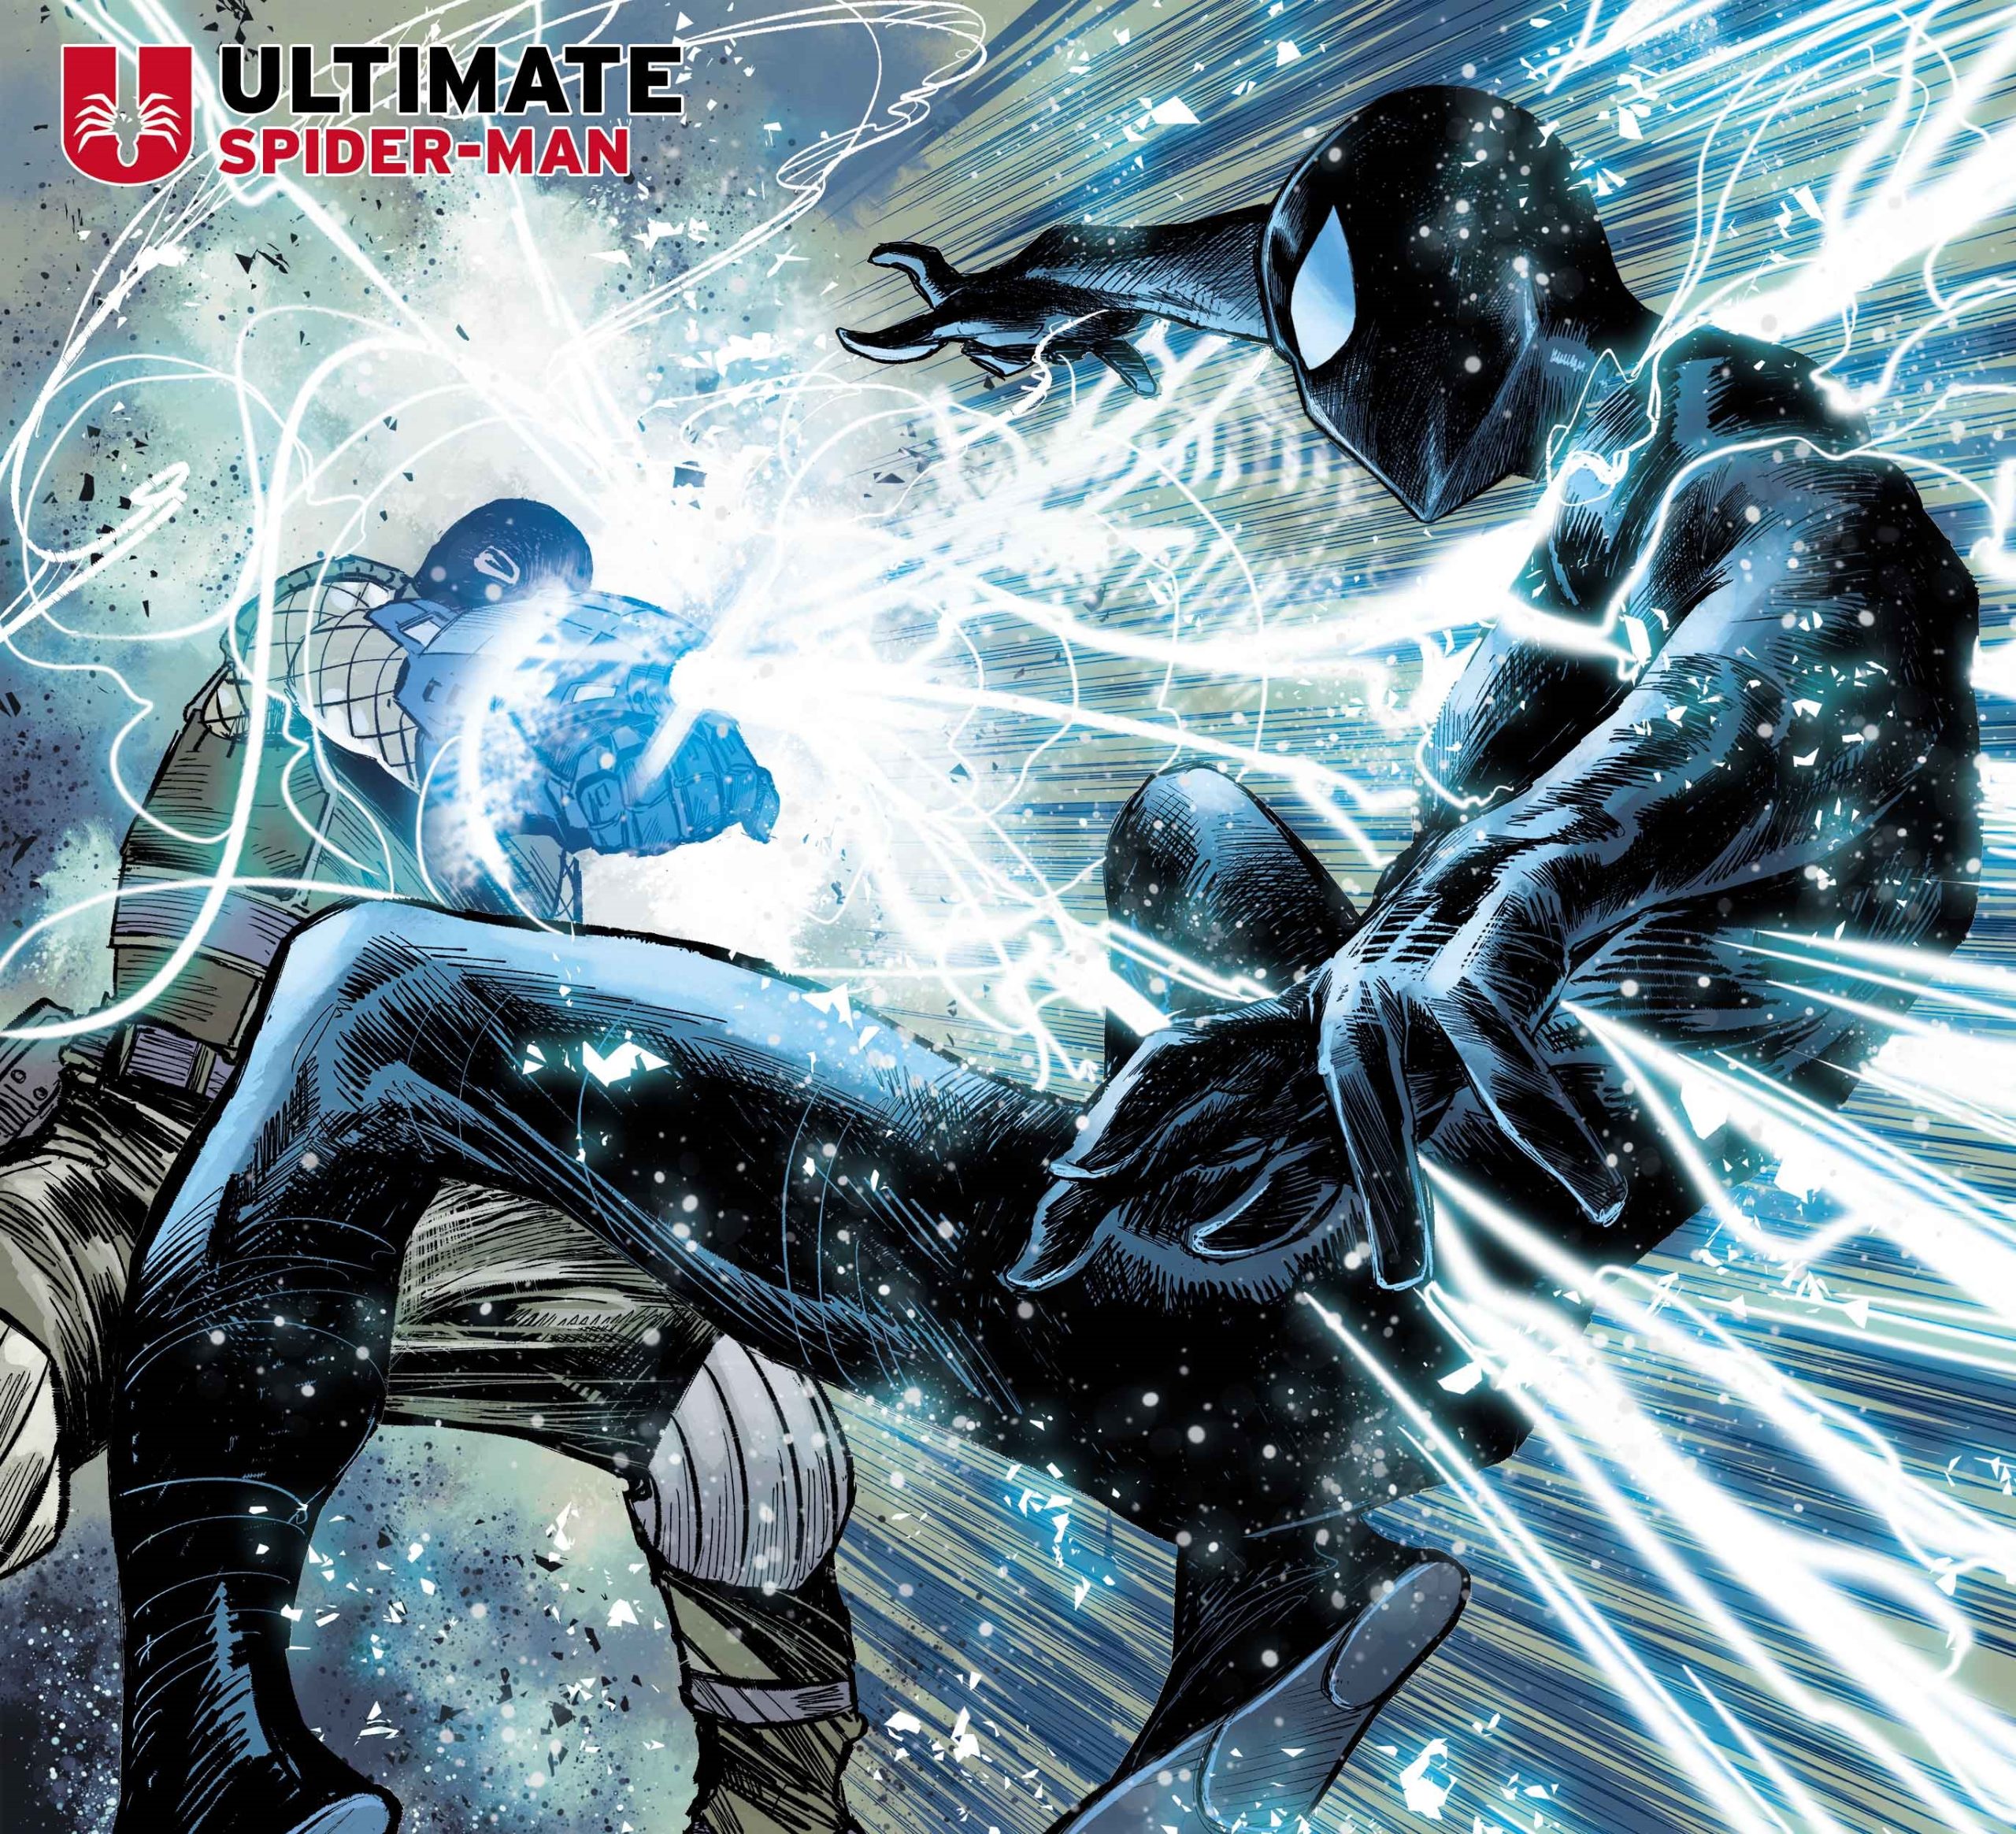 See Ultimate Shocker and peek at 'Ultimate Spider-Man' #2 preview